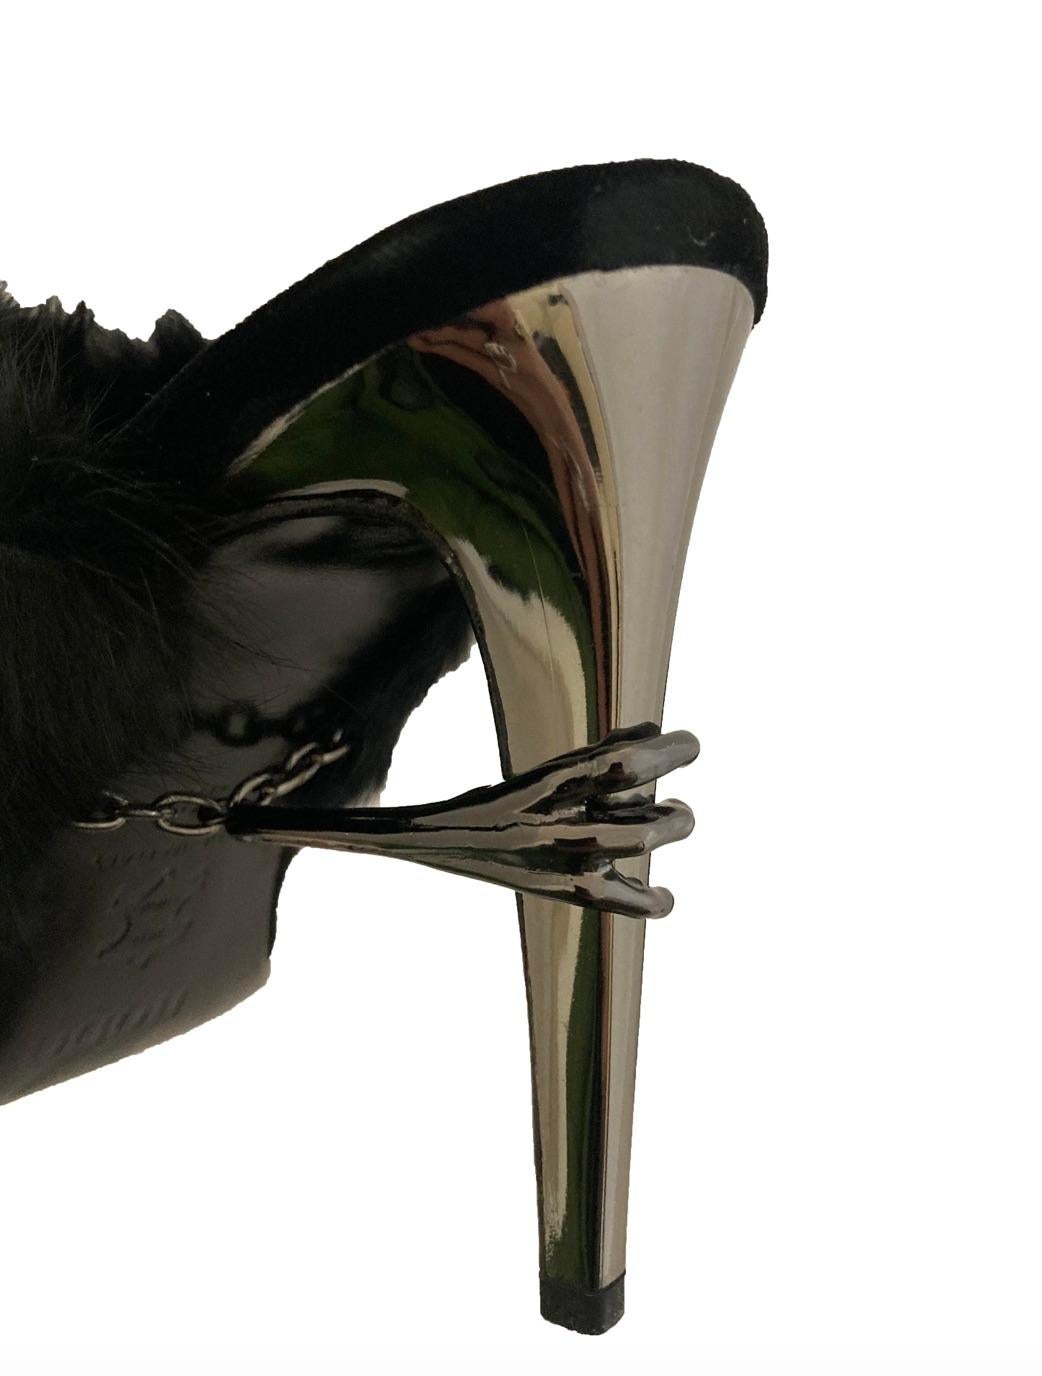 Black velvet Raven mules from Rodo. Super pointed, elongated toe in black velvet with a black faux fur trim around the opening of each mule. Backless, strapless, slip on style with an 11cm shiny pewter toned metal heel gripped by a metal ravens claw